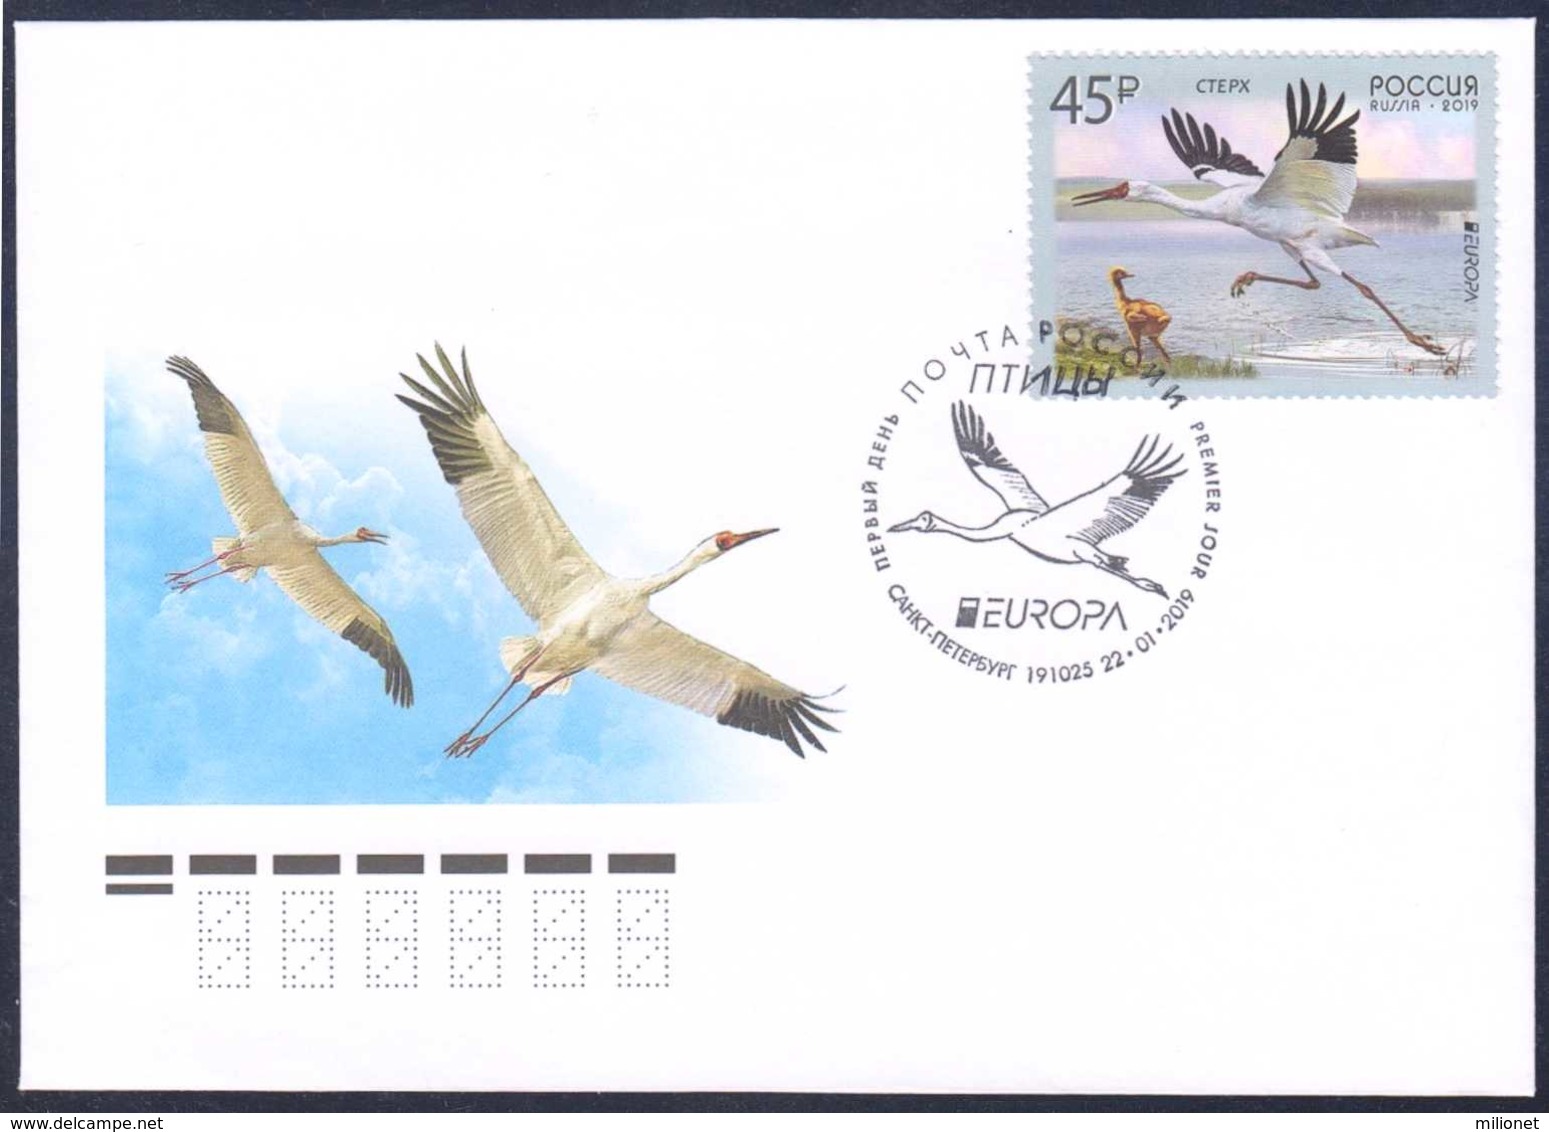 RUSSIA RUSIA RUSSIE RUSSLAND 2019 EUROPA BIRDS FDC First Day Cover Postmark "SAINT PETERSBURG" - 2019